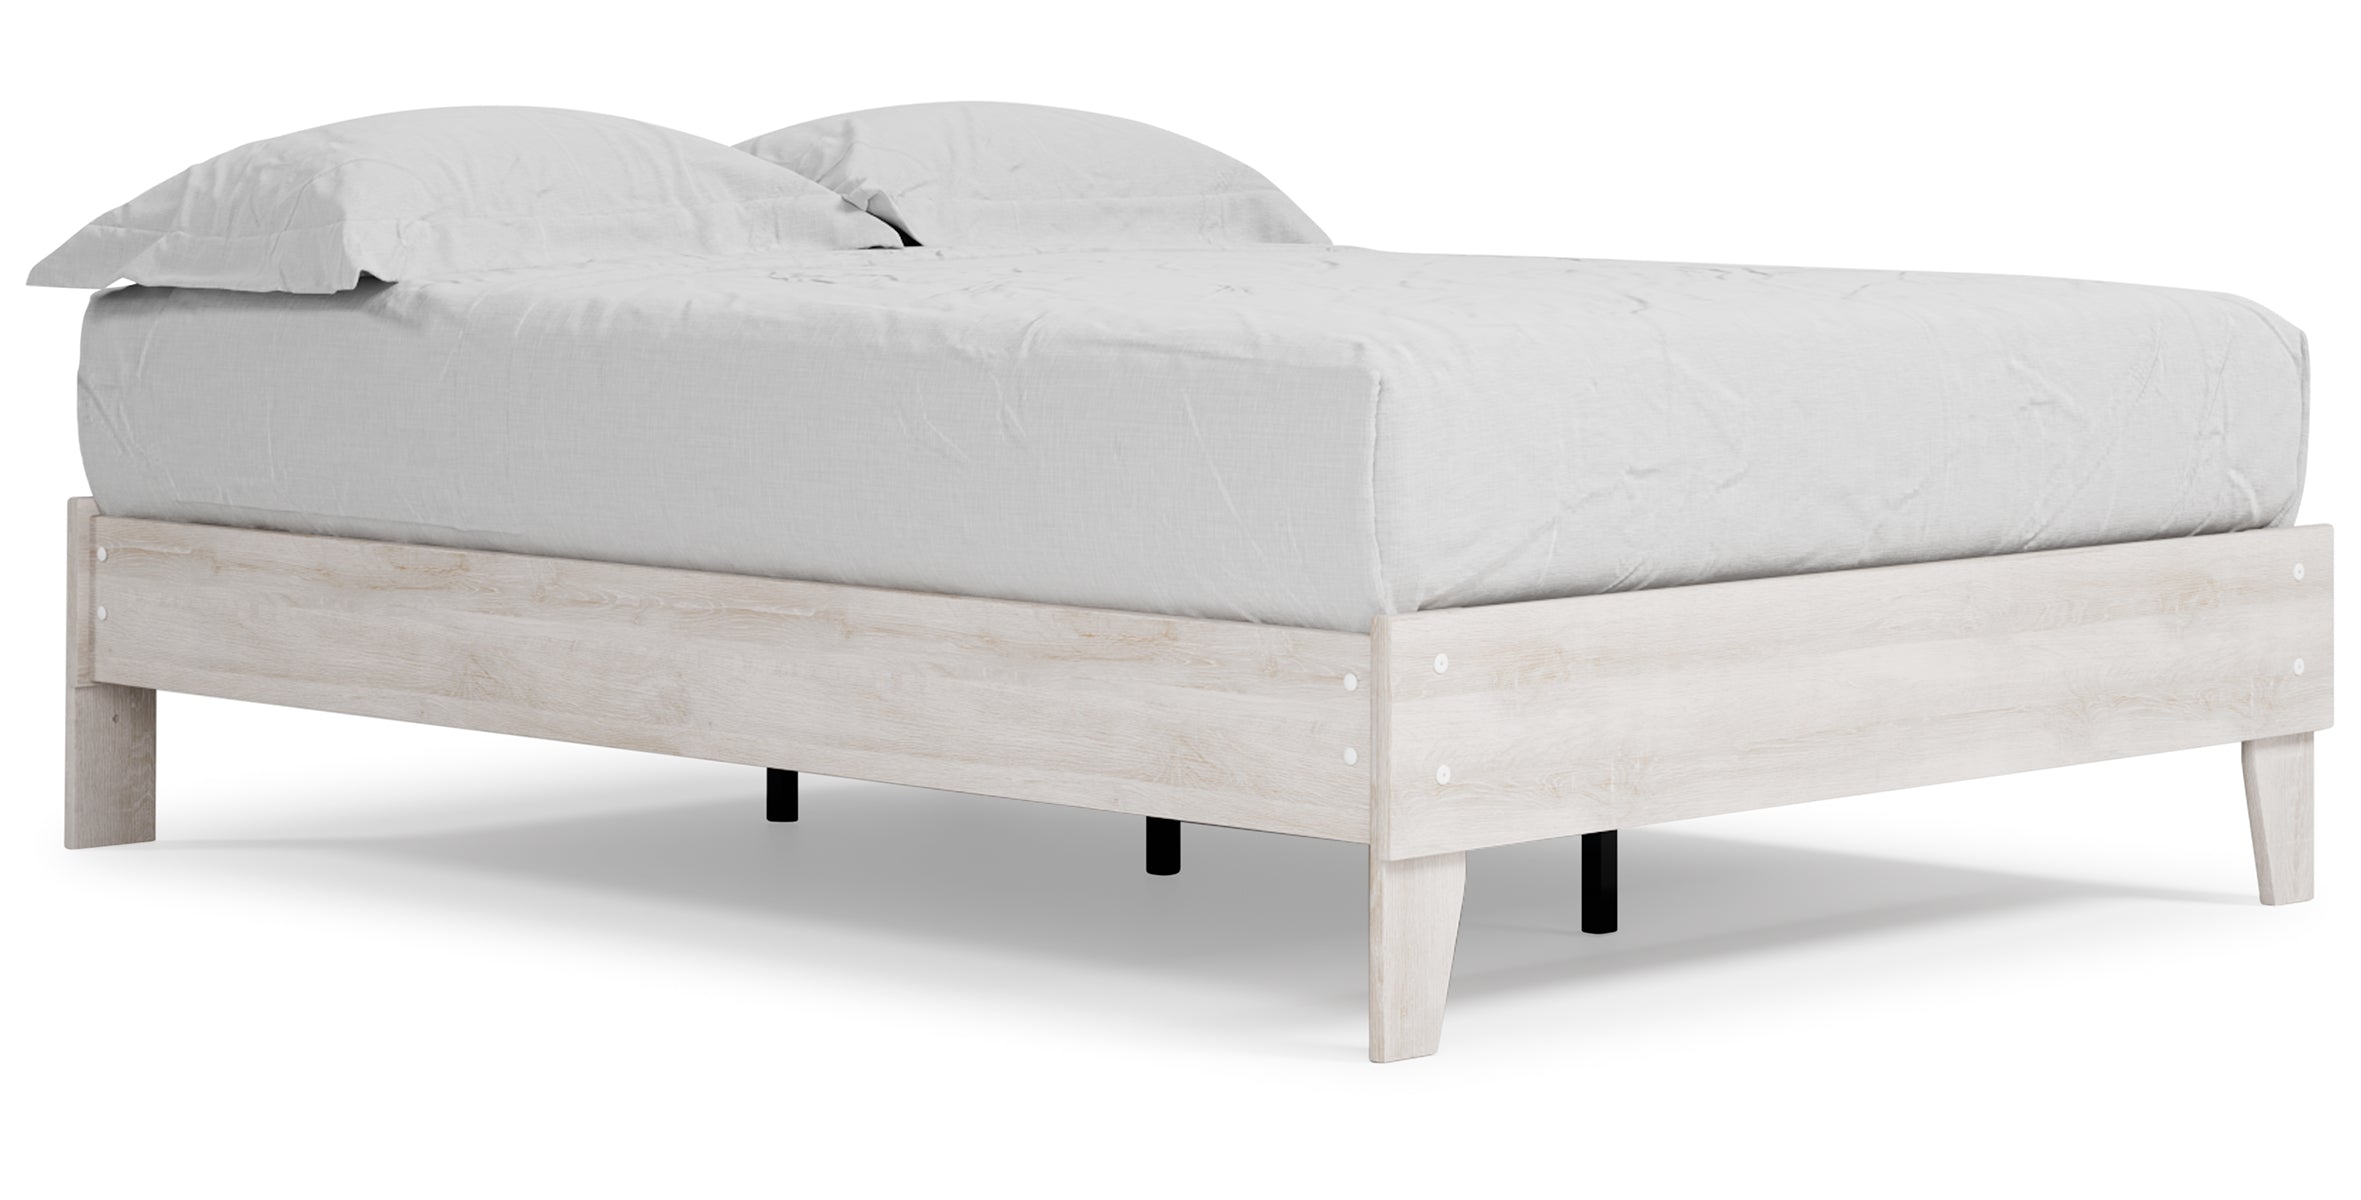 Paxberry Full Platform Bed